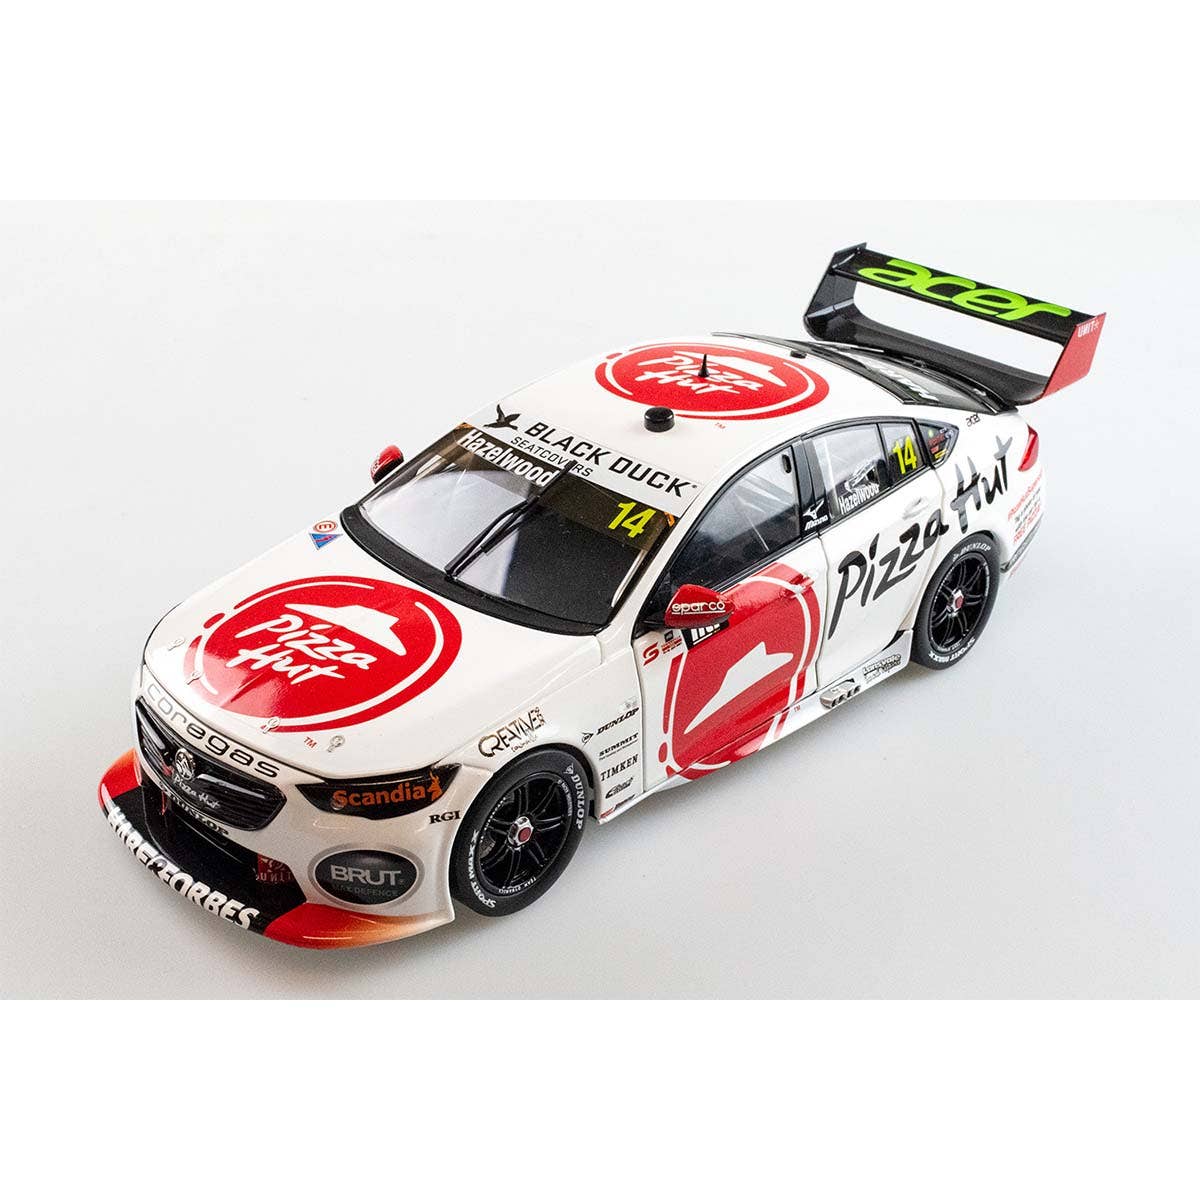 HOLDEN ZB COMMODORE - BJR PIZZA HUT - HAZELWOOD #14 - 2021 NTI Townsville 500 Race16 - 1:43 Scale Diecast Model Car